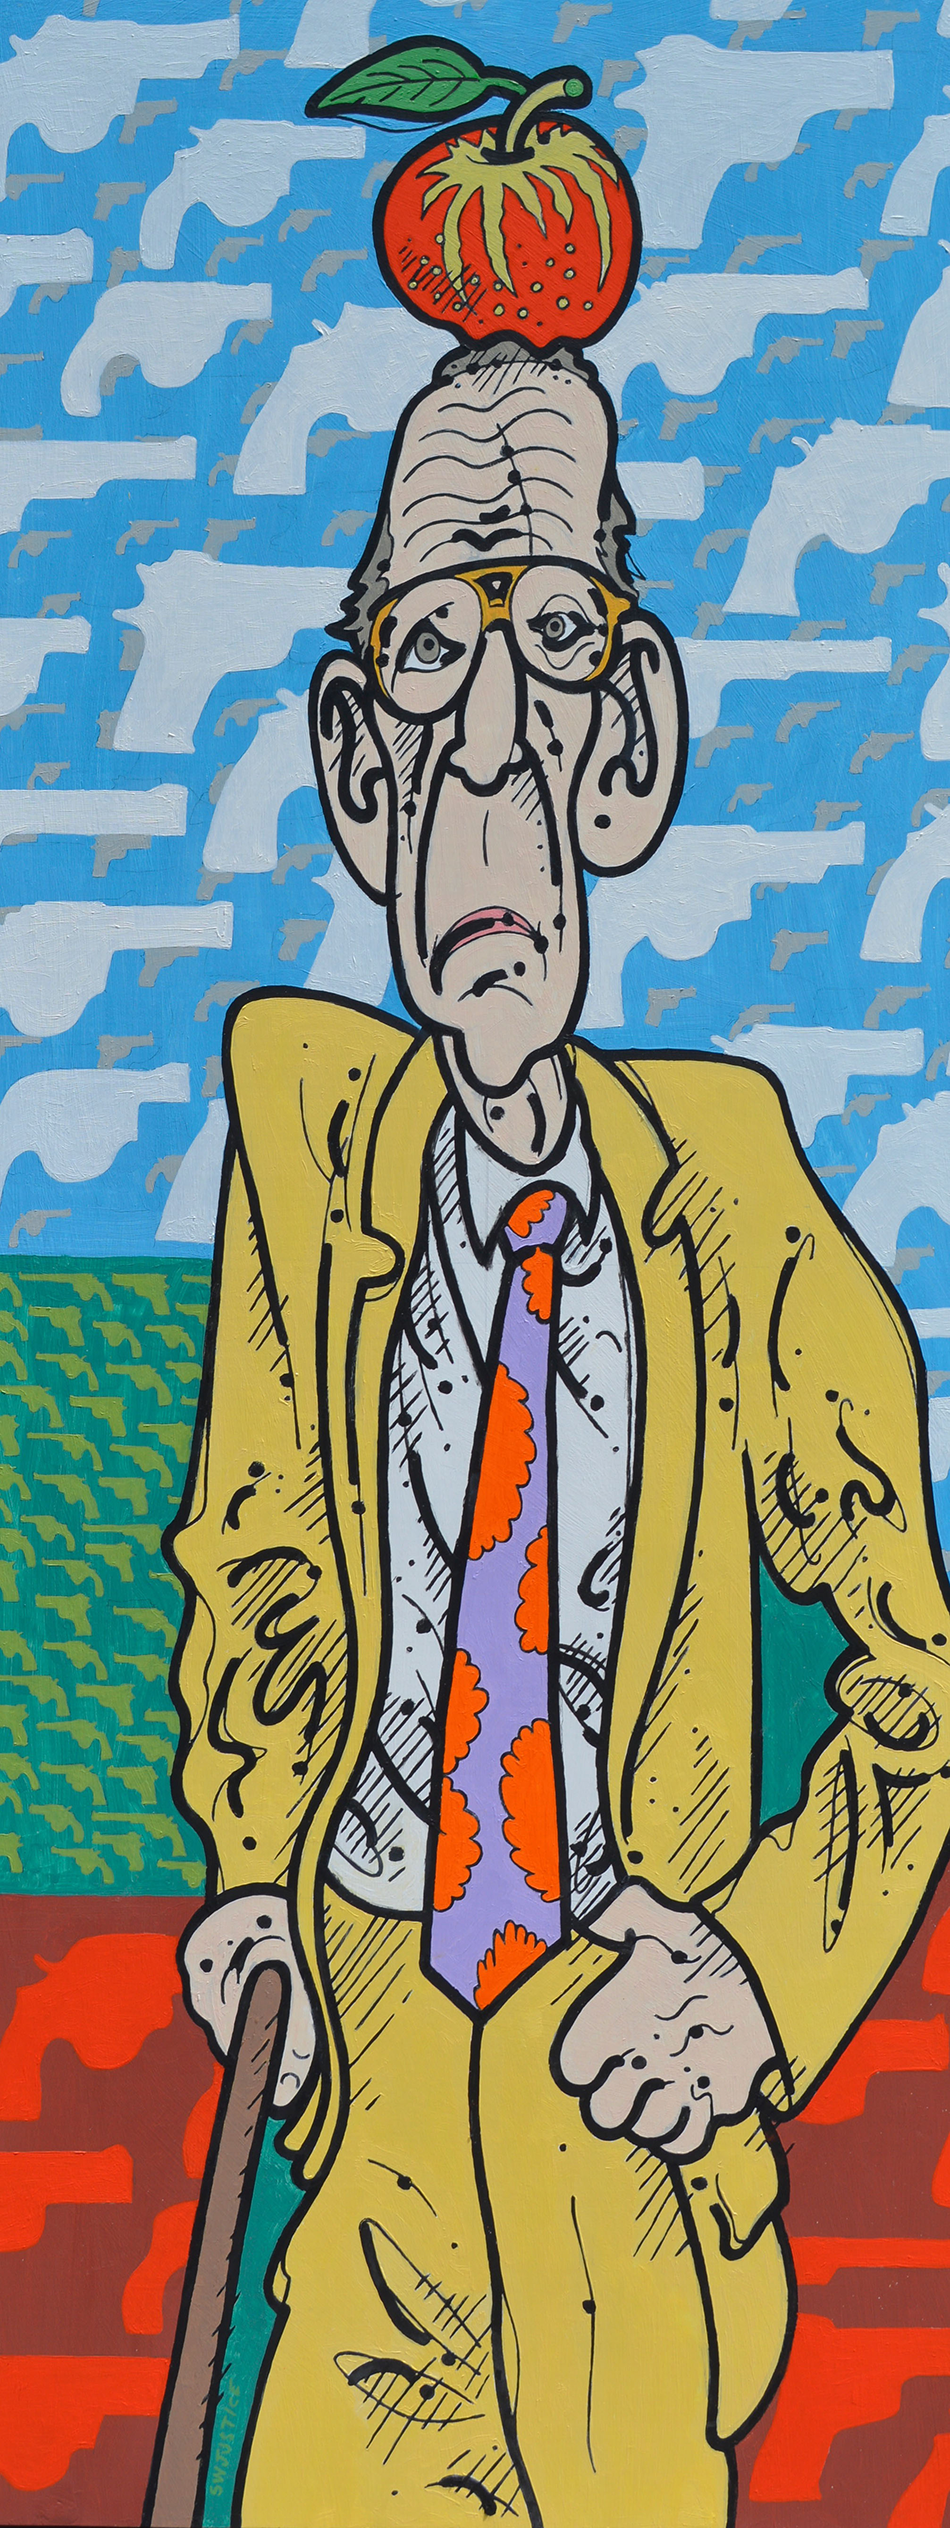 Steve Justice StudioTitle: William Tell Overshare: portrait of William Burroughs Material: Oil on canvas Size: 60x24 Year: 2016